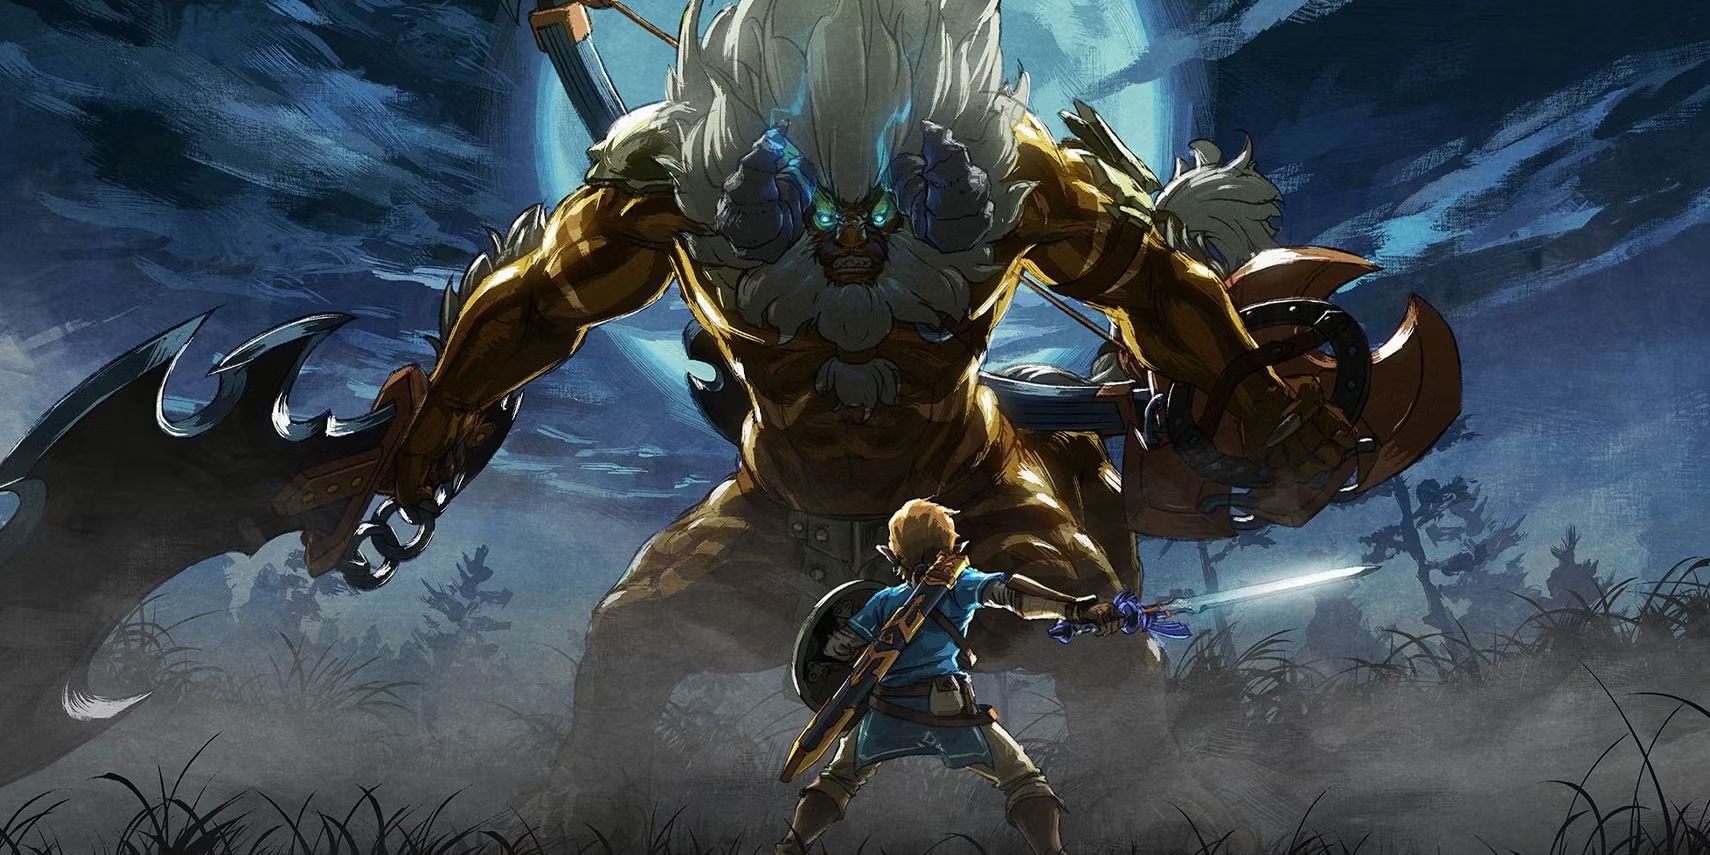 Link vs Lynel Breath of the Wild guide